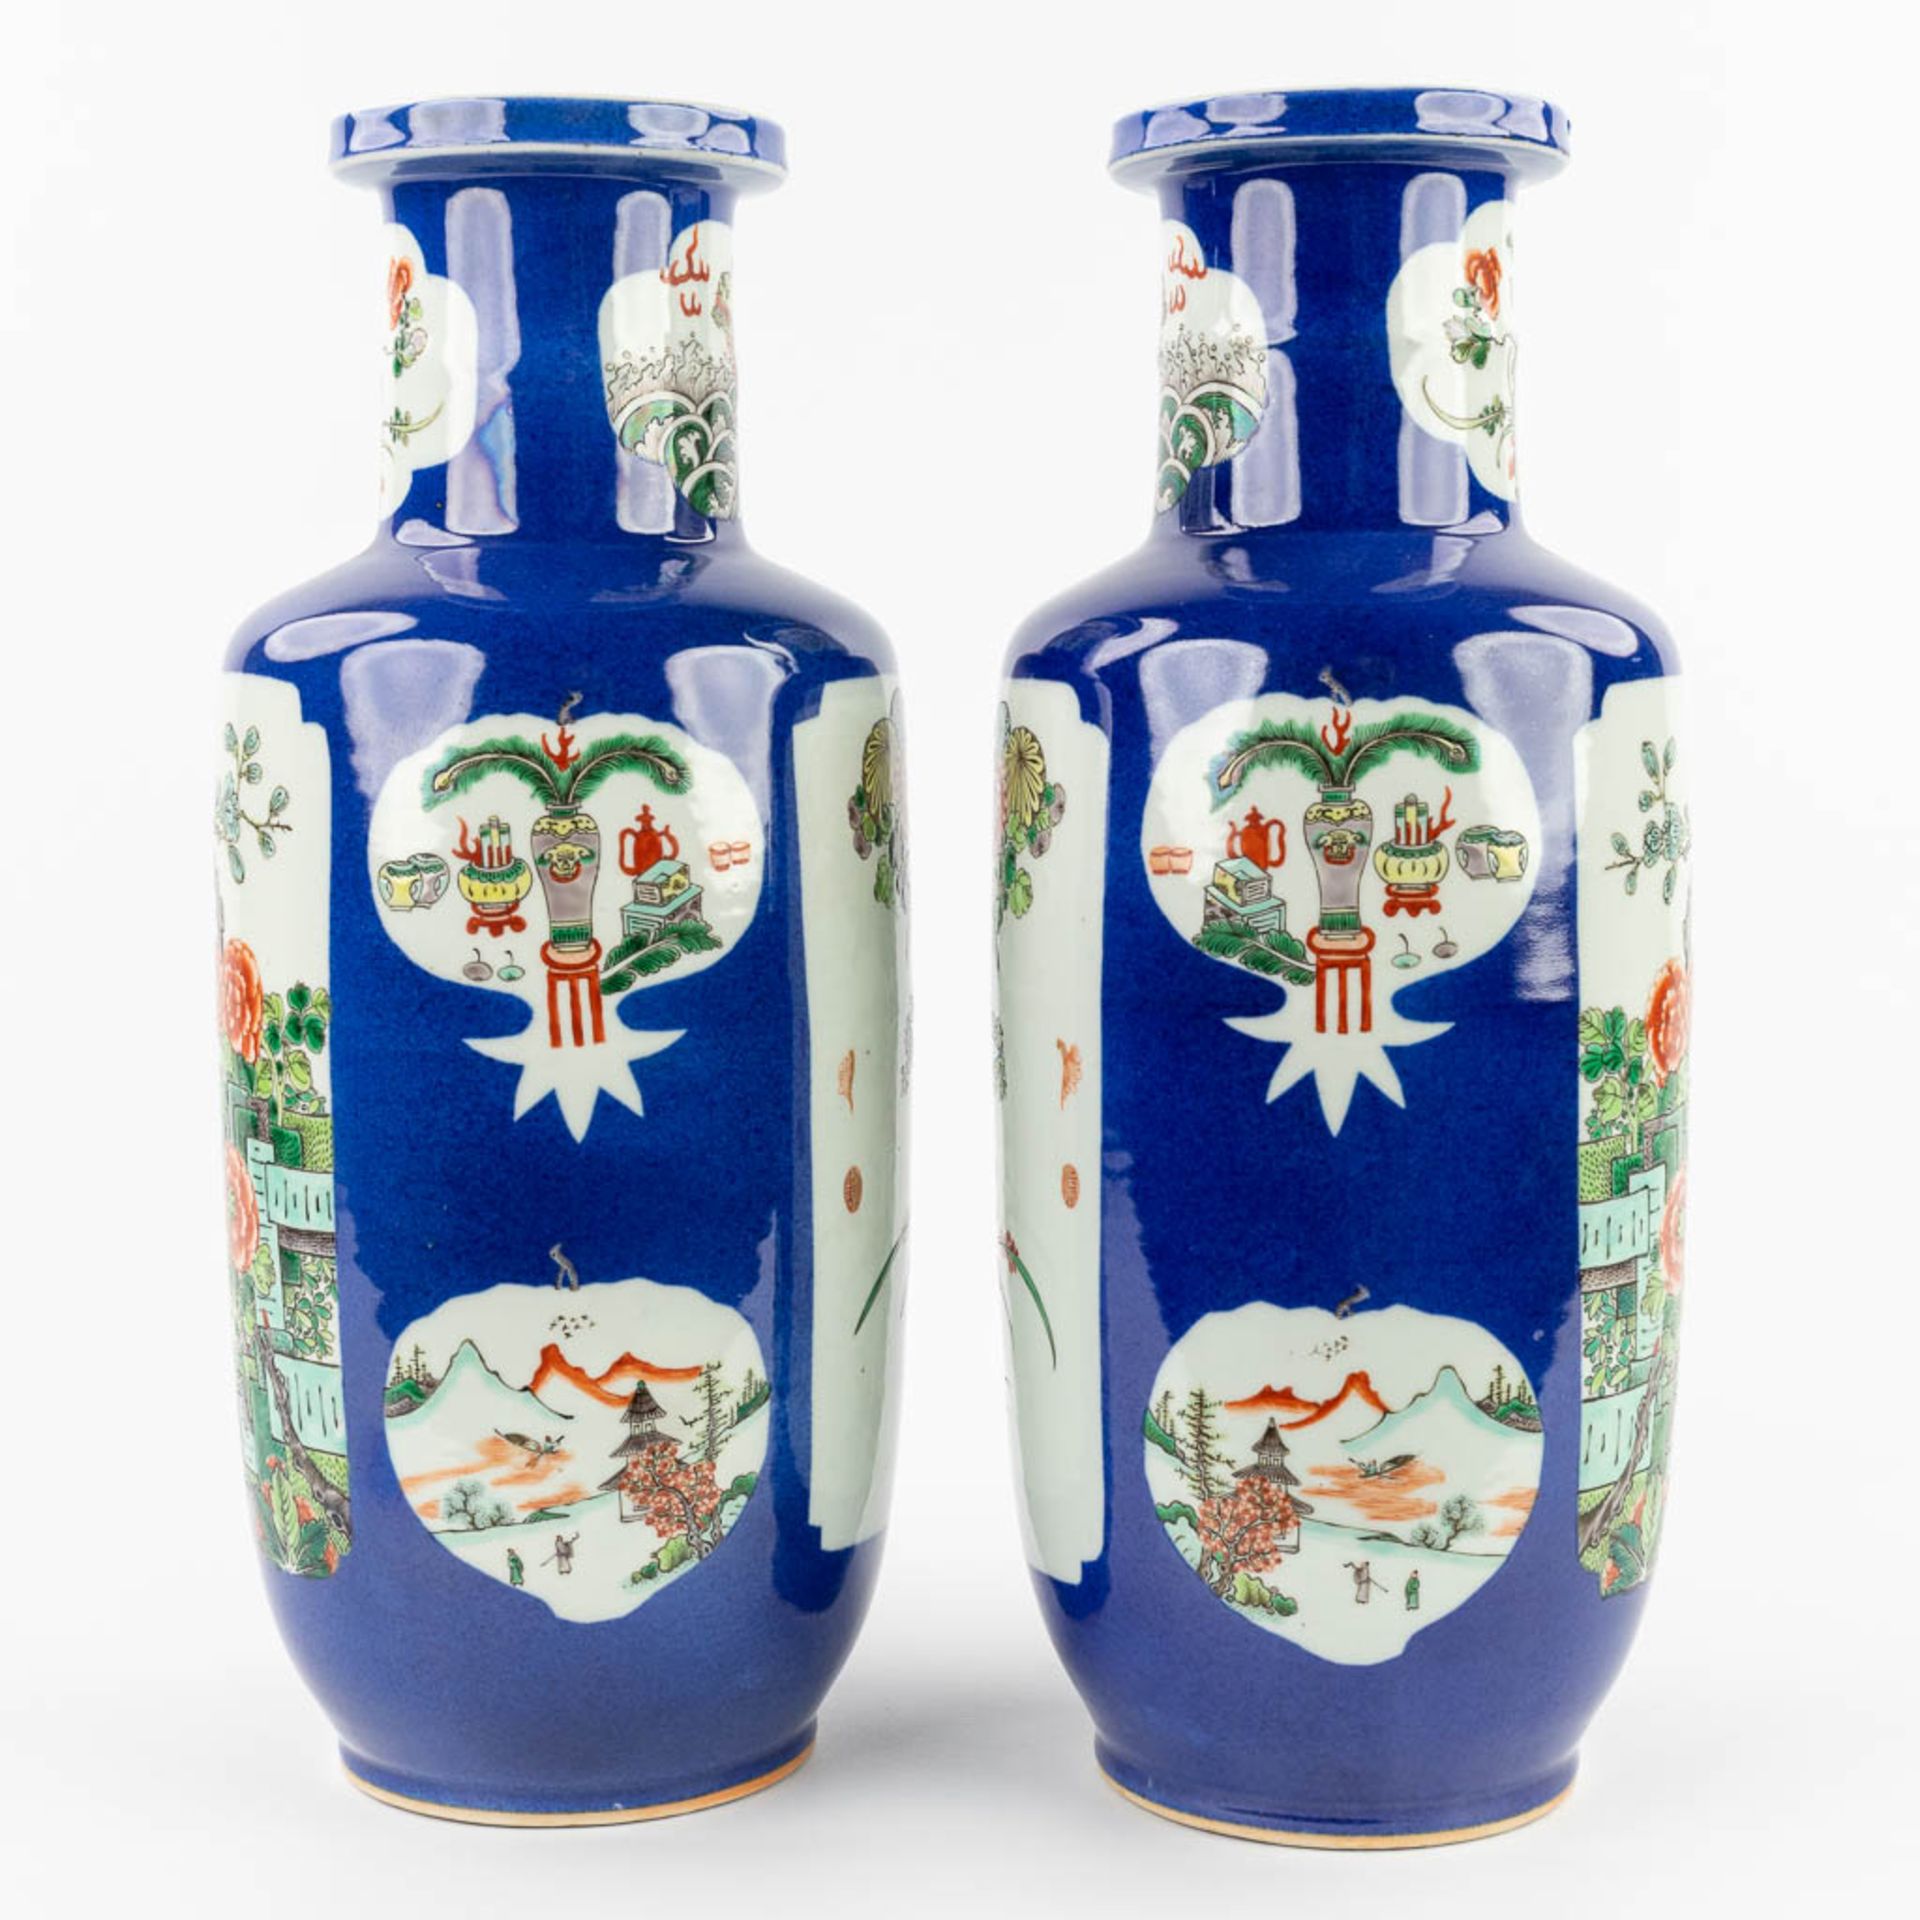 A pair of Chinese vases, decorated with fauna and flora. 20th C. (H:45 x D:18 cm) - Image 5 of 13